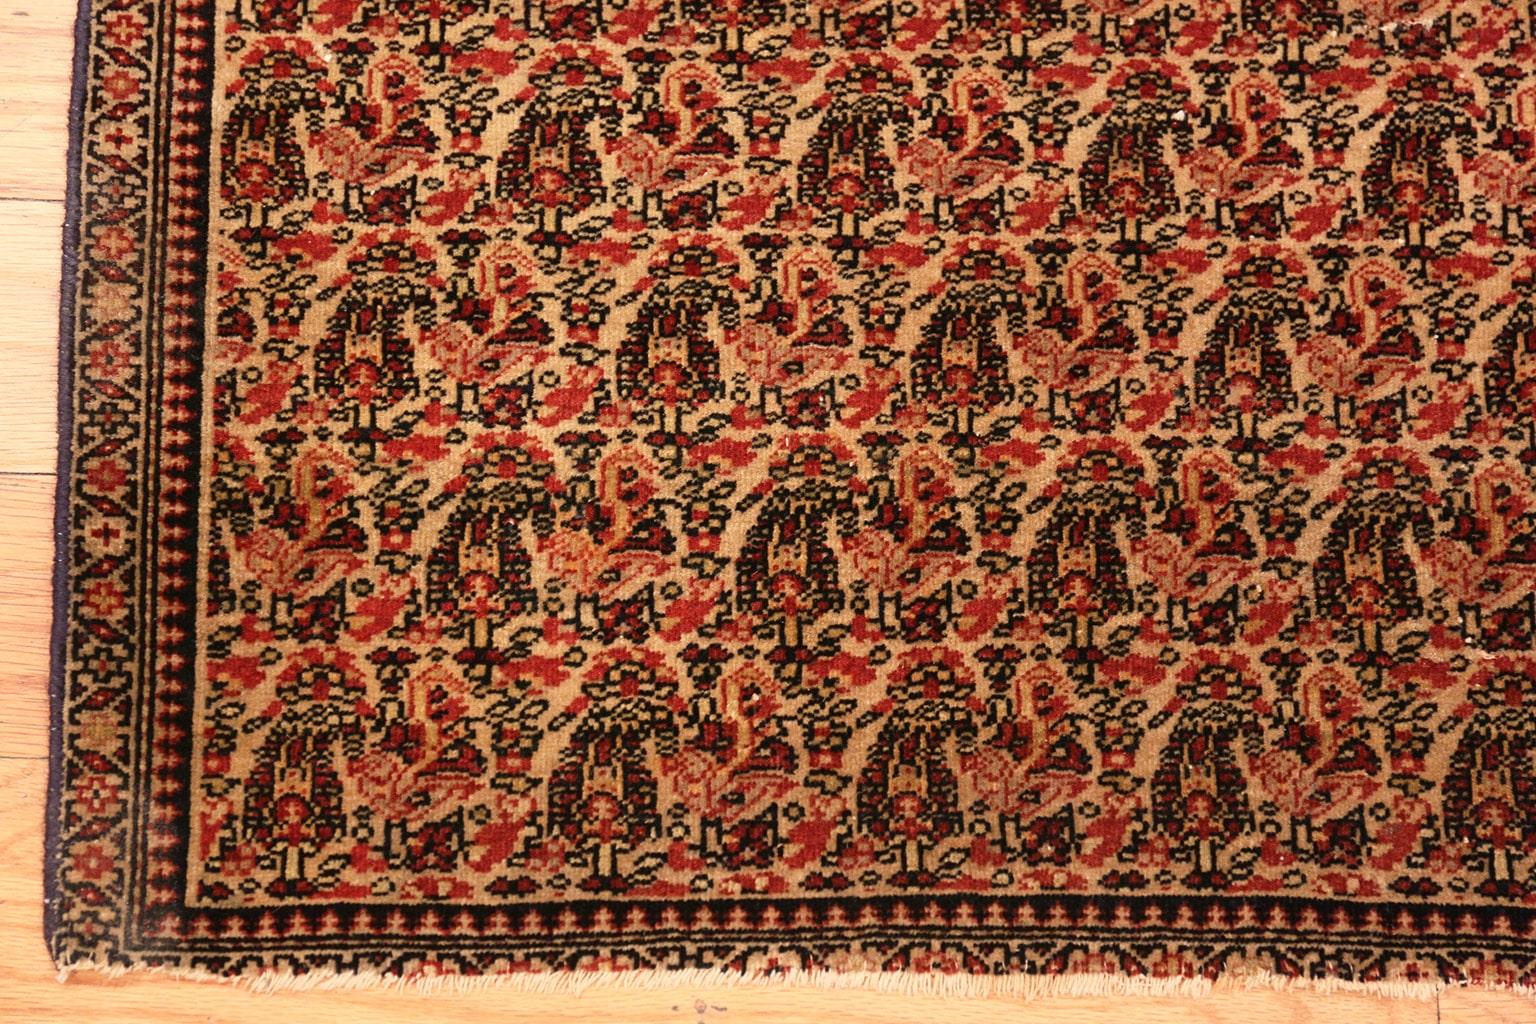 Antique Persian Senneh rug, origin: Persia, date circa 1880. Size: 3 ft x 1 ft 10 in (0.91 m x 0.56 m).

This extraordinary antique Persian Senneh carpet is an outstanding example of the distinctive designs and unique style associated with Persia’s